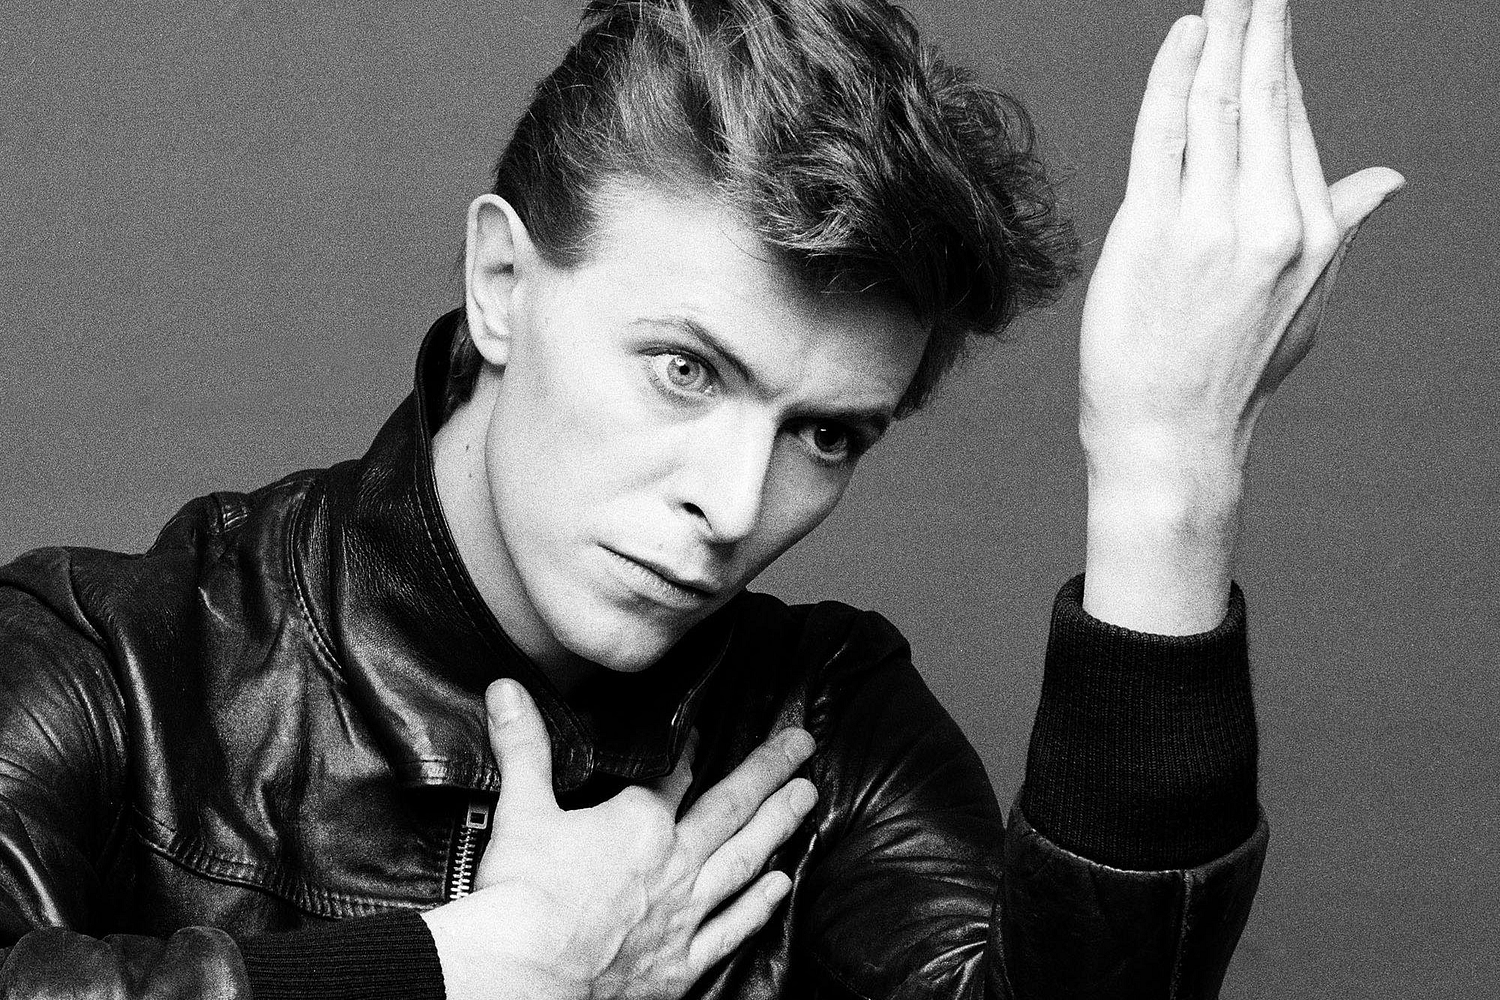 David Bowie impersonates Bruce Springsteen, Iggy Pop, Lou Reed & more